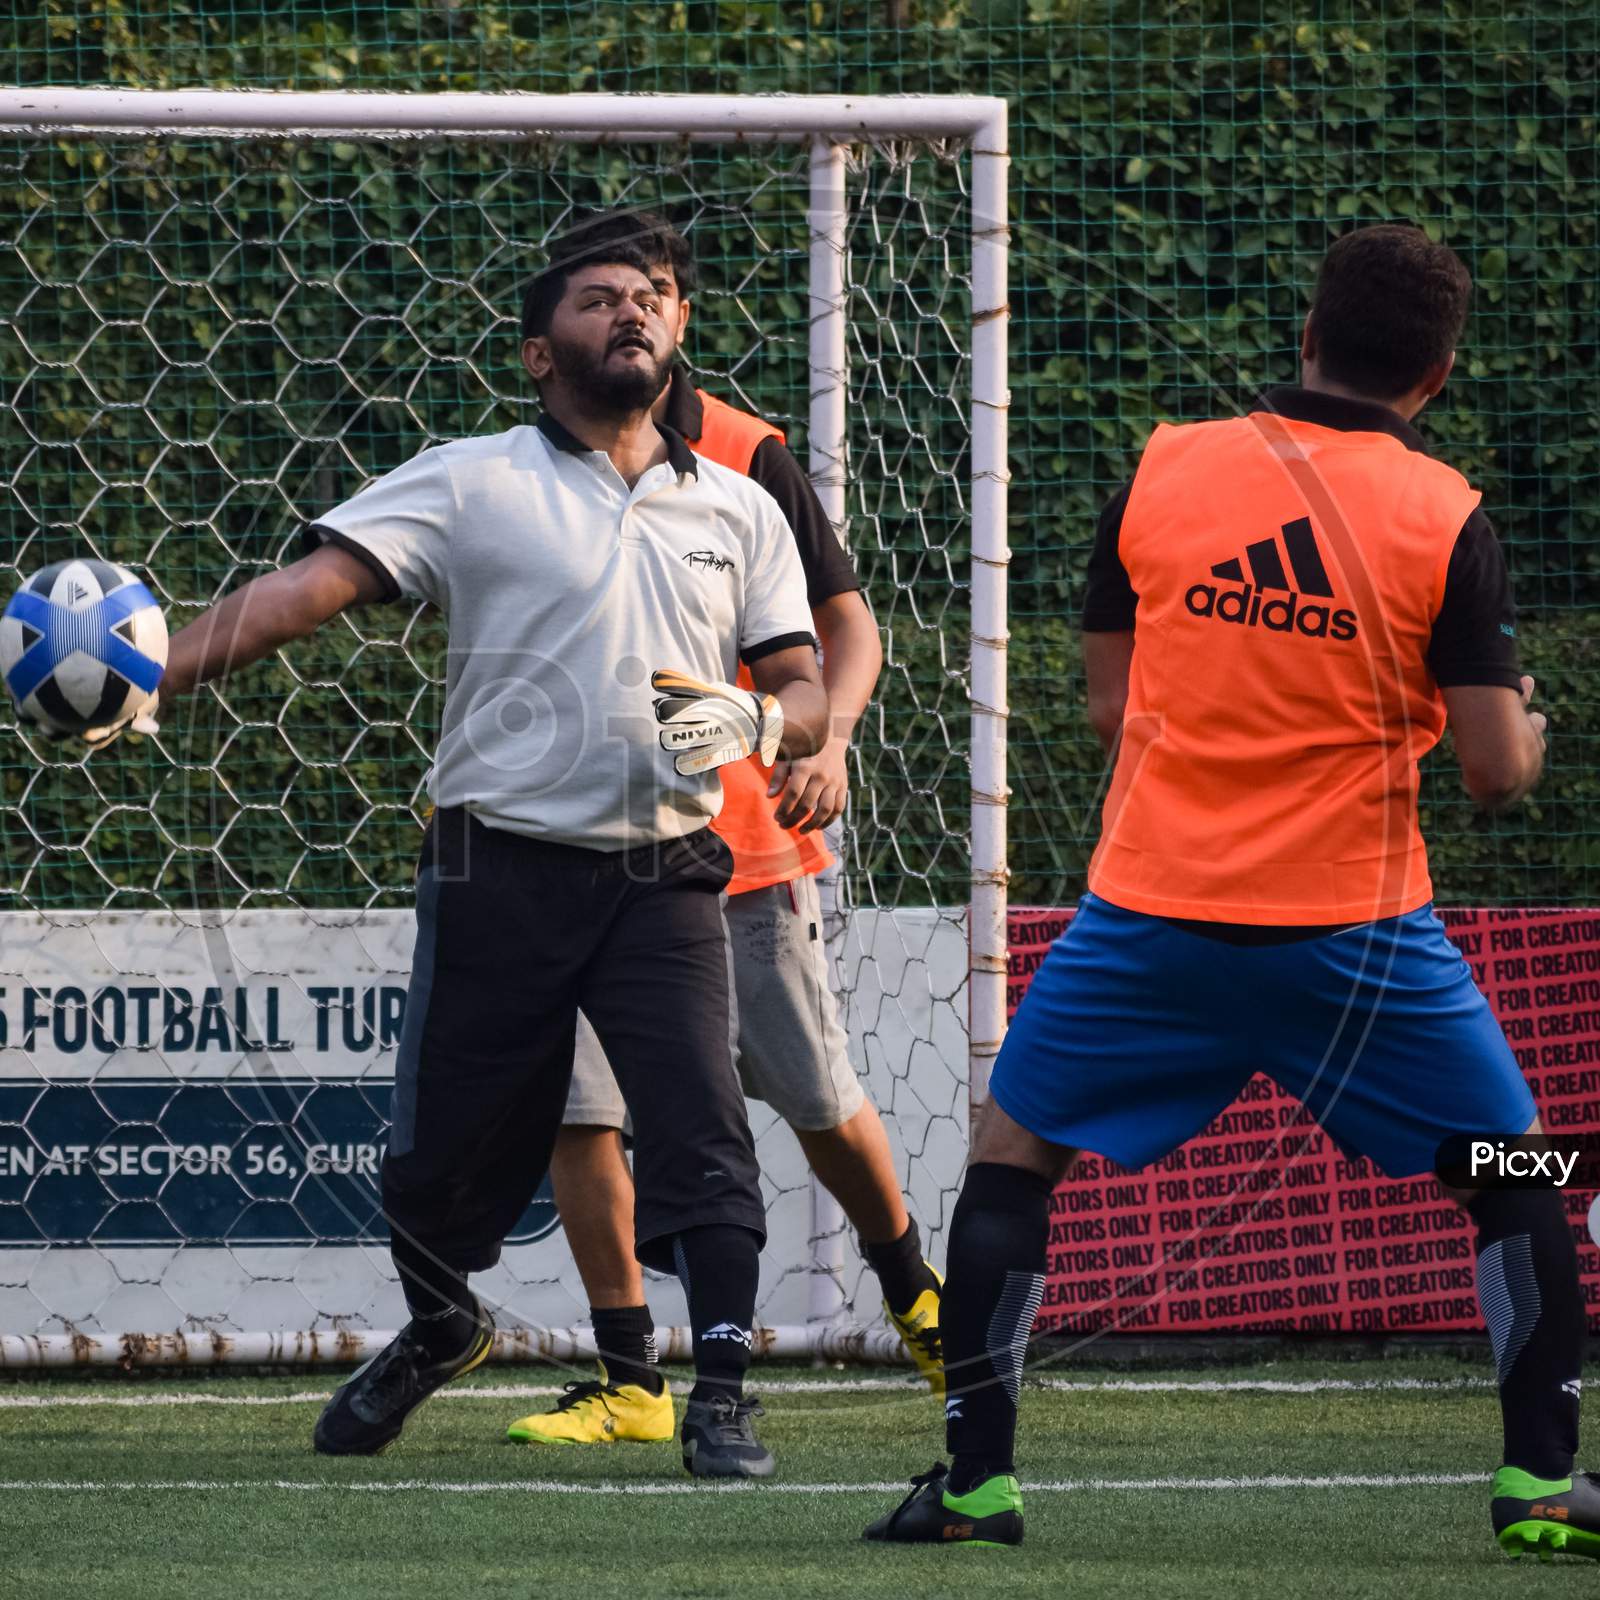 New Delhi, India - July 01 2018: Footballers Of Local Football Team During Game In Regional Derby Championship On A Bad Football Pitch. Hot Moment Of Football Match On Grass Green Field Of The Stadium